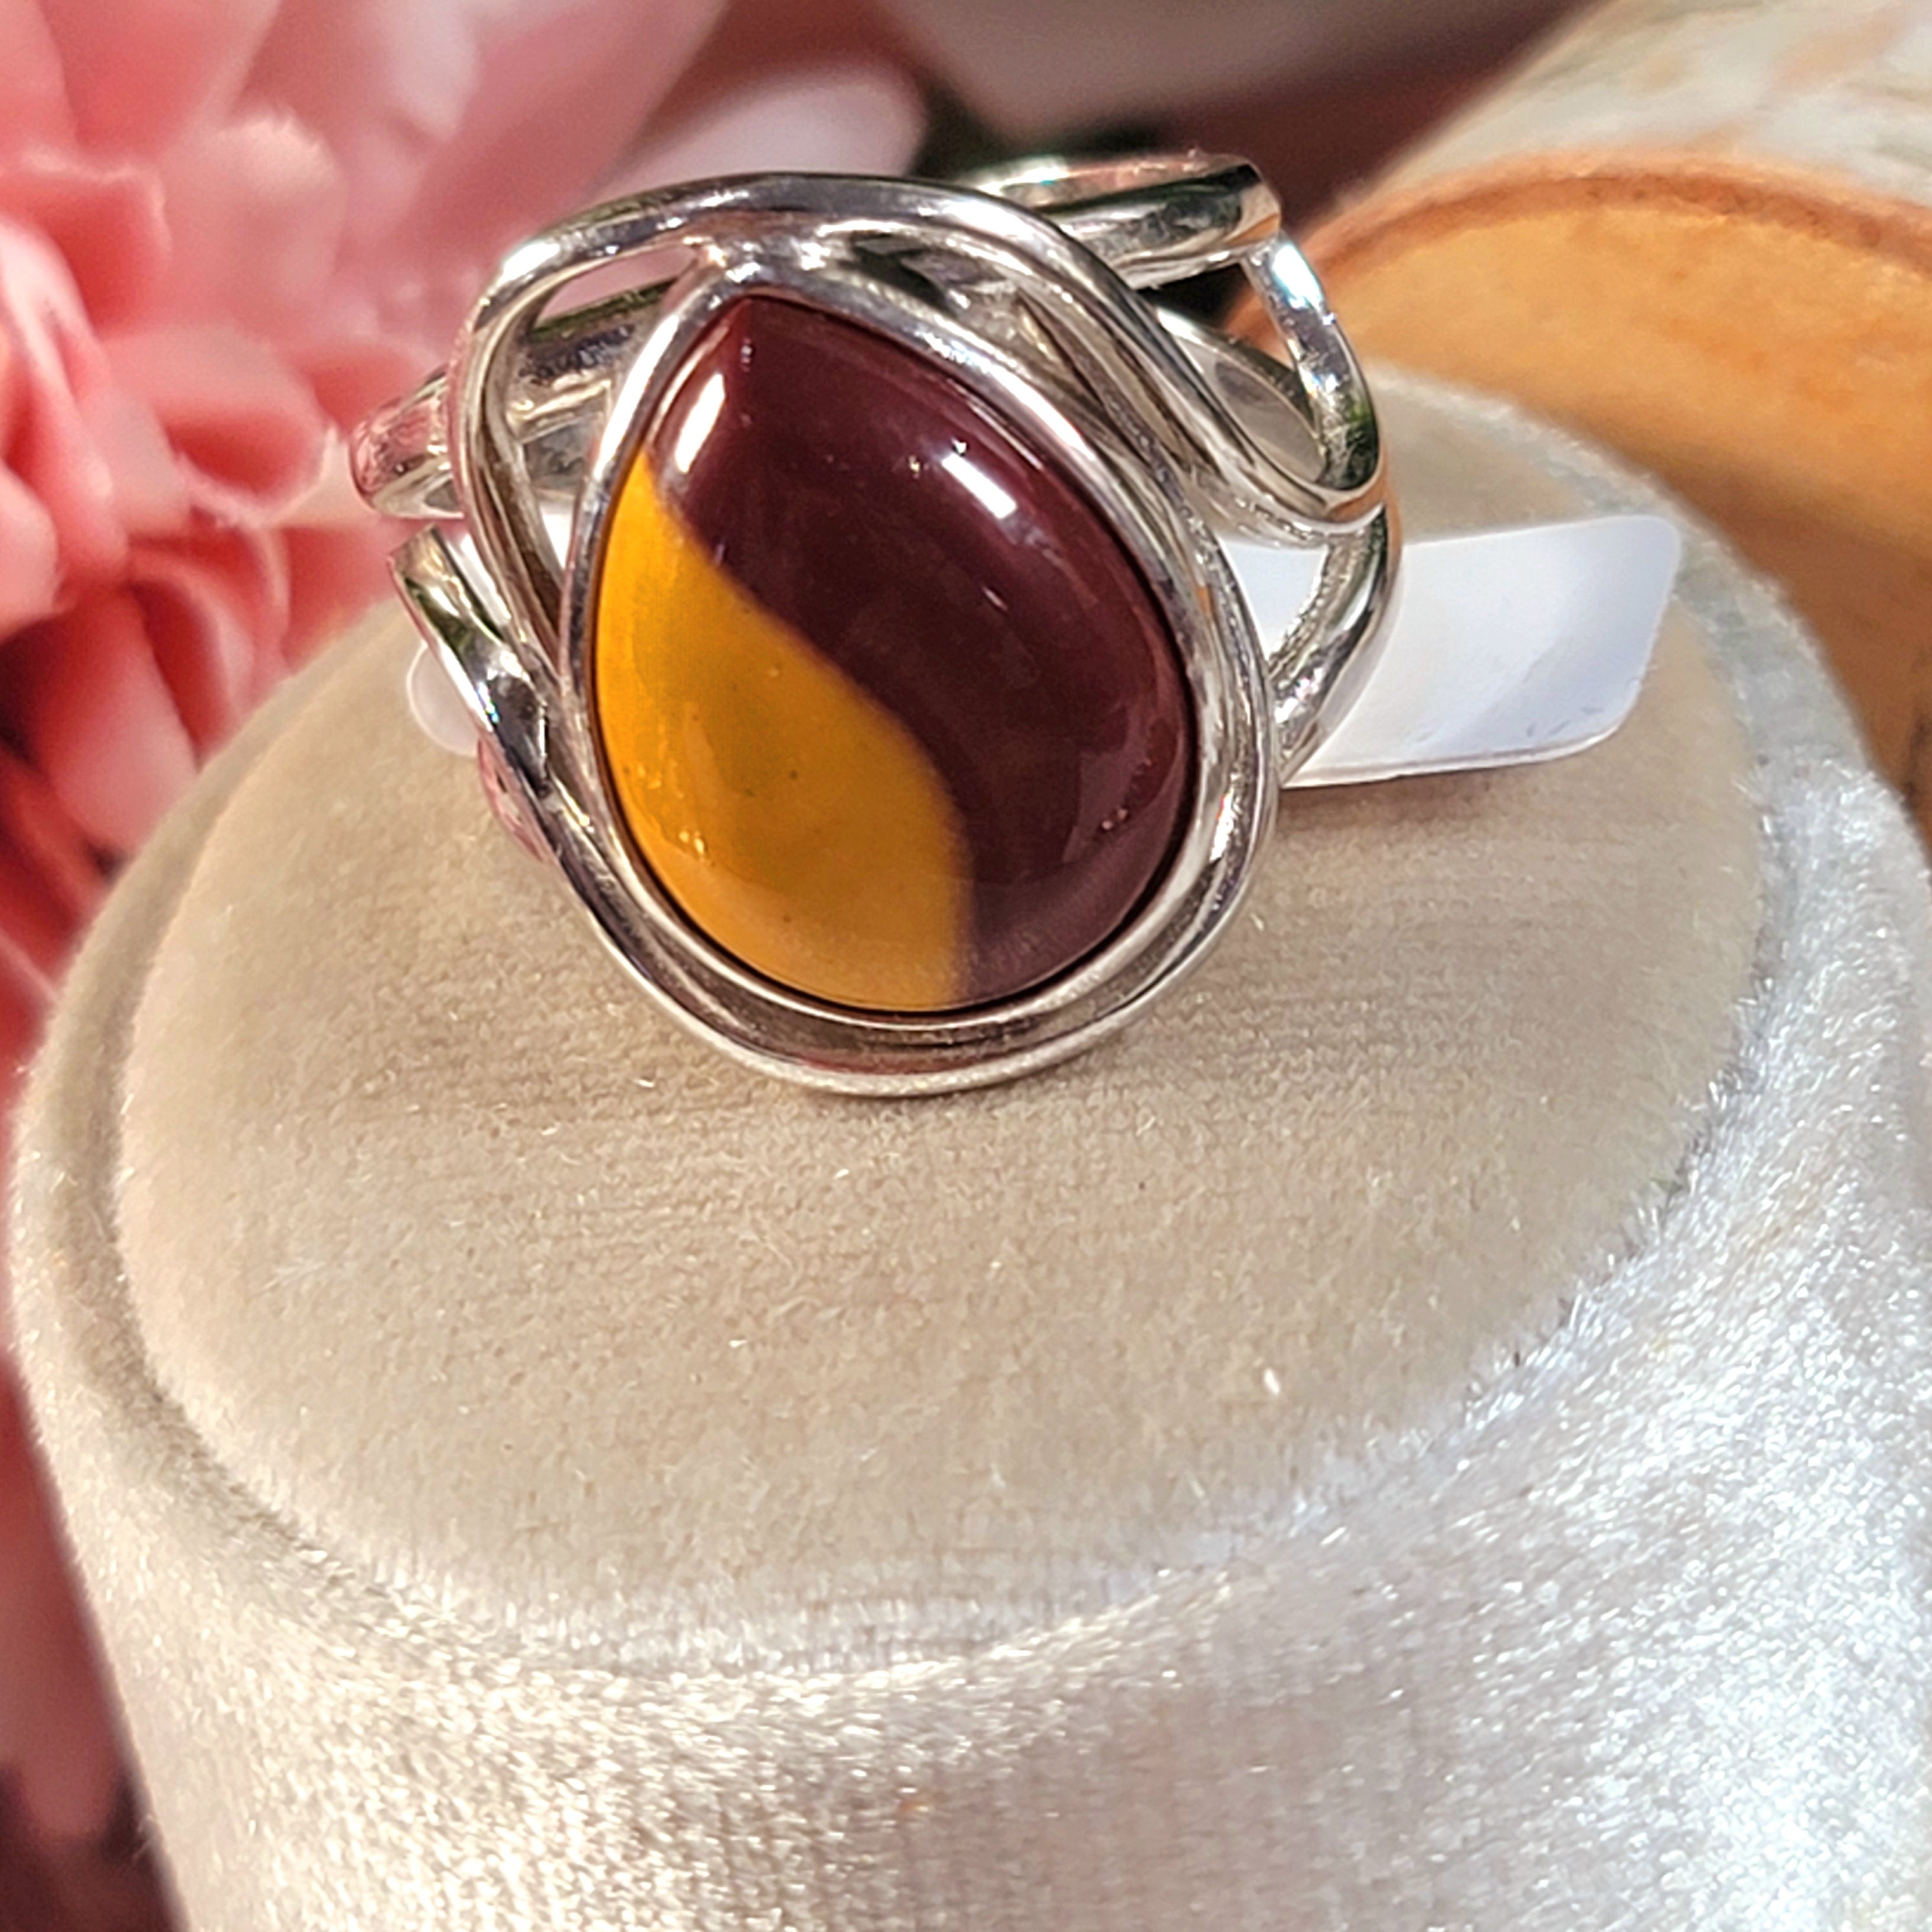 Mookaite Jasper Finger Bracelet Adjustable Ring .925 Silver for Personal Power and Youthful Beauty